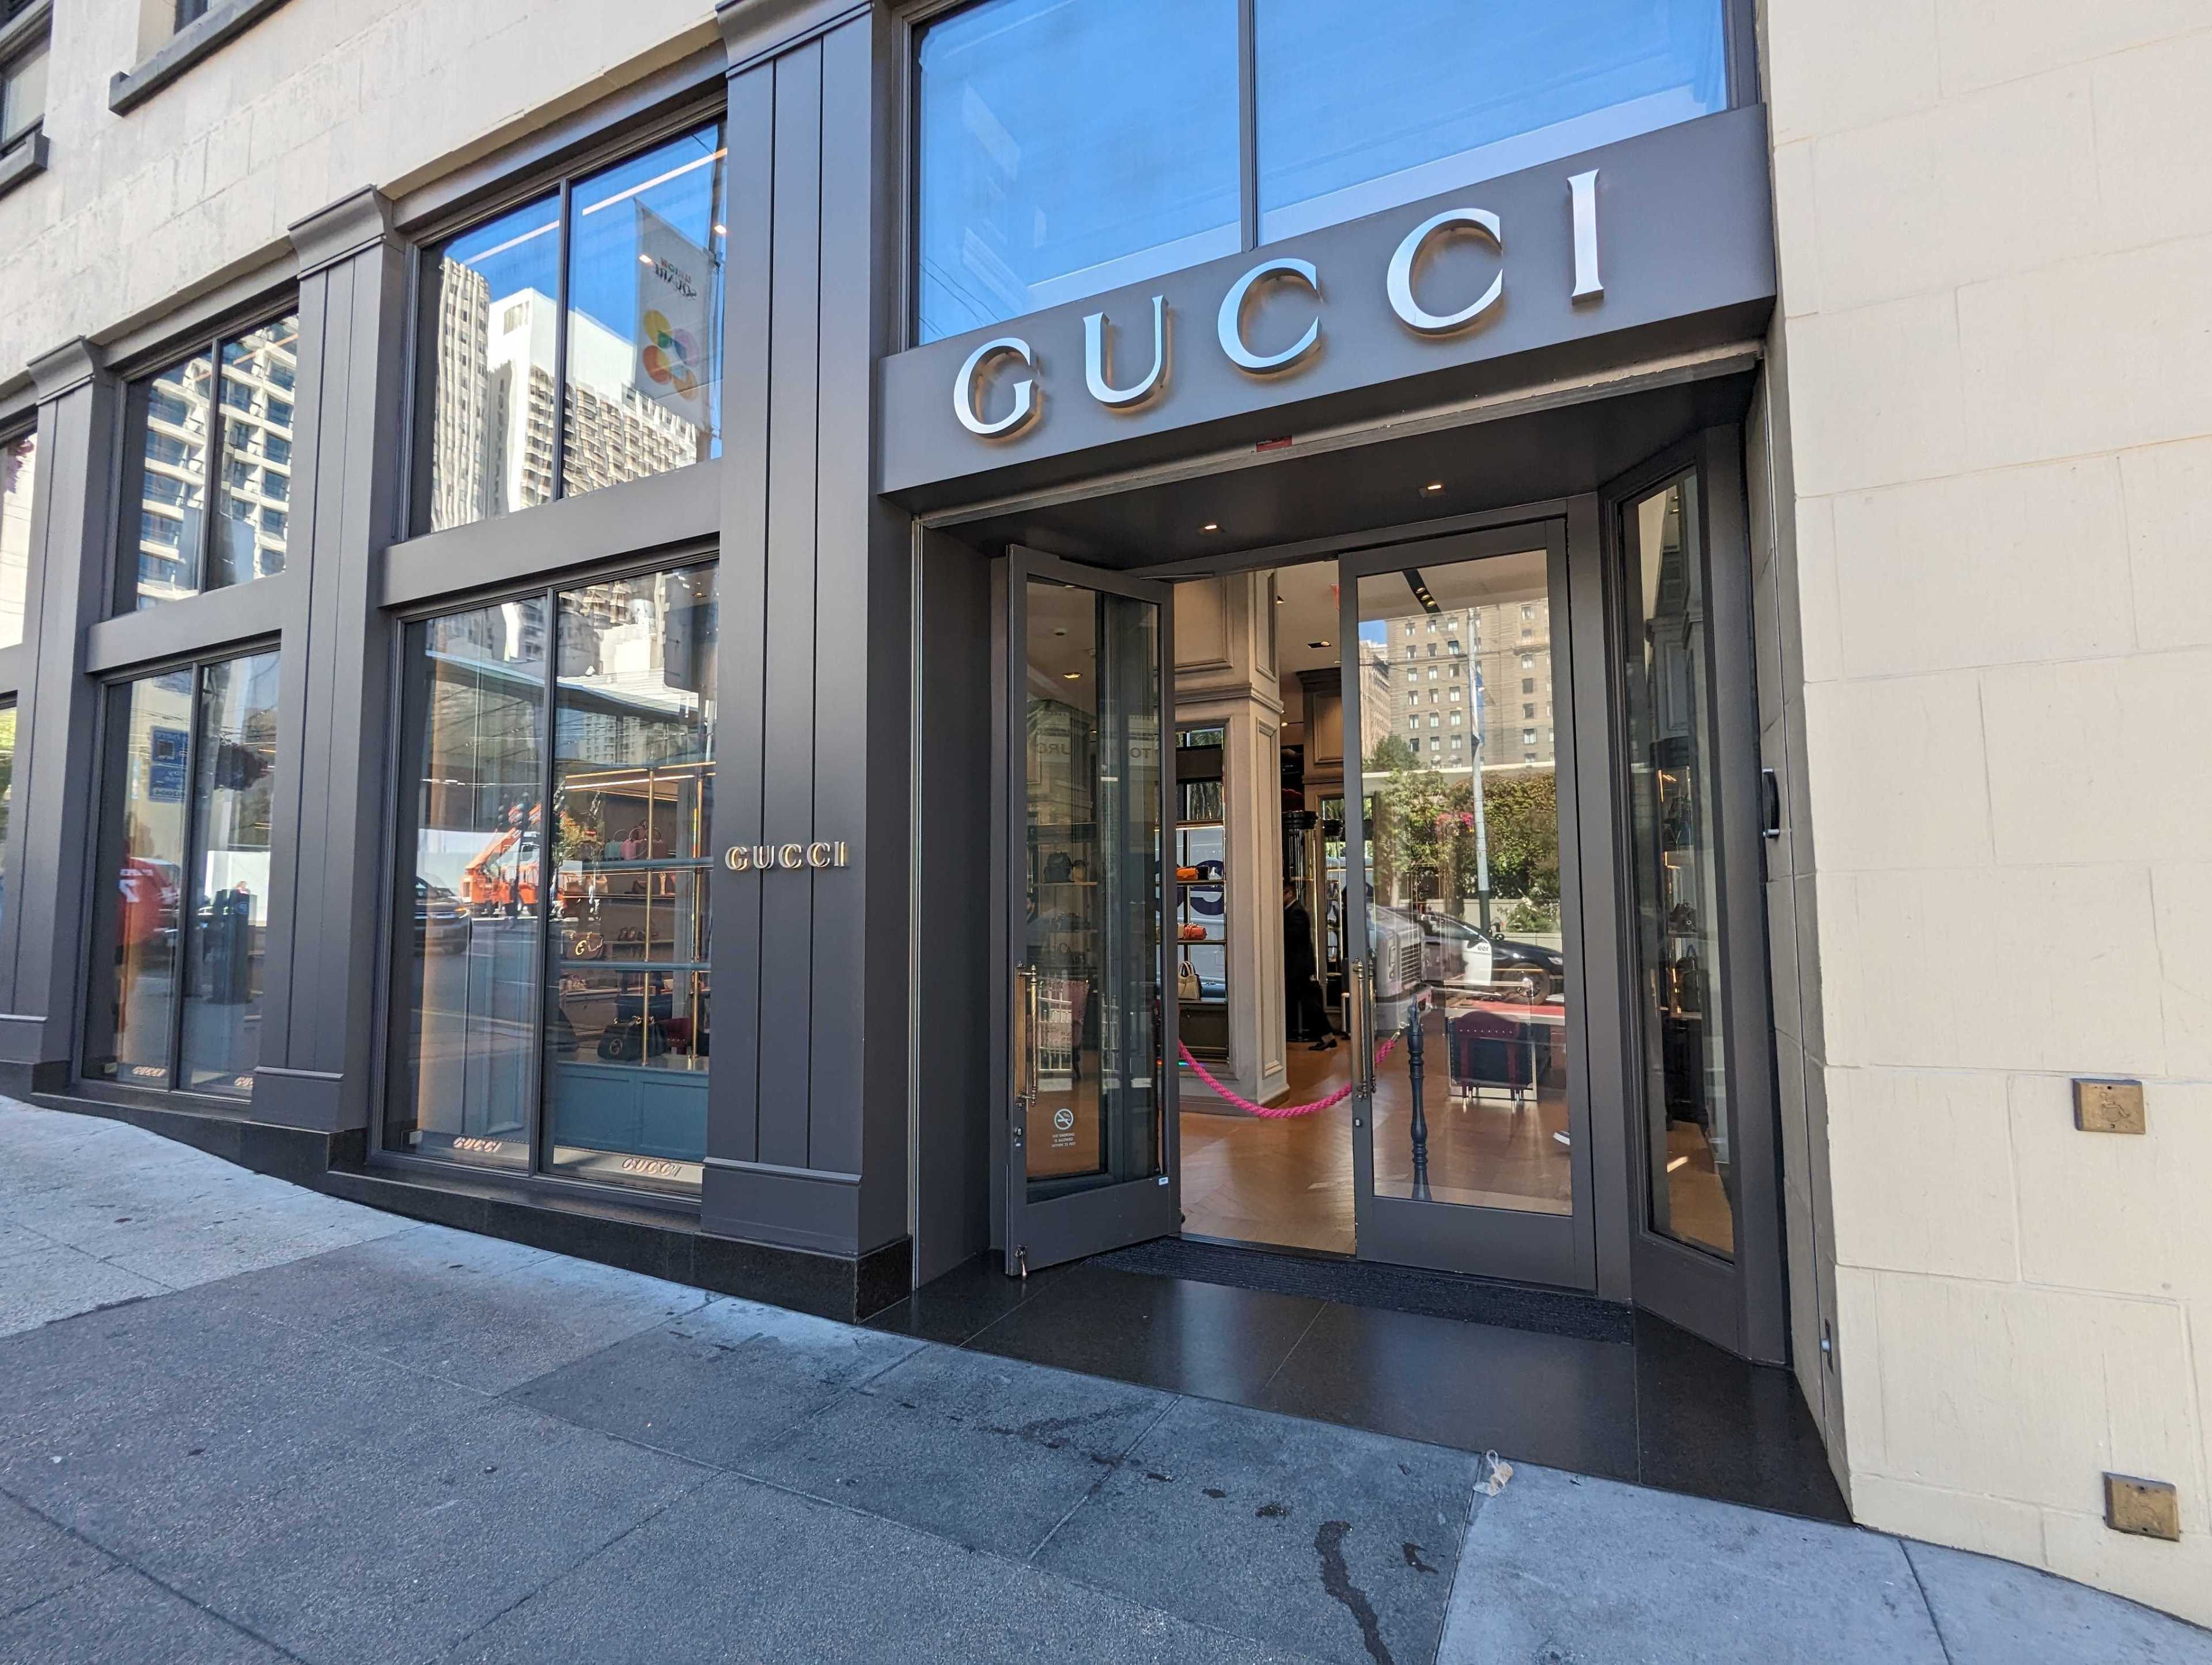 The flagship Gucci Store in San Francisco's Union Square shopping district is open for business Tutesday | George Kelly/The Standard